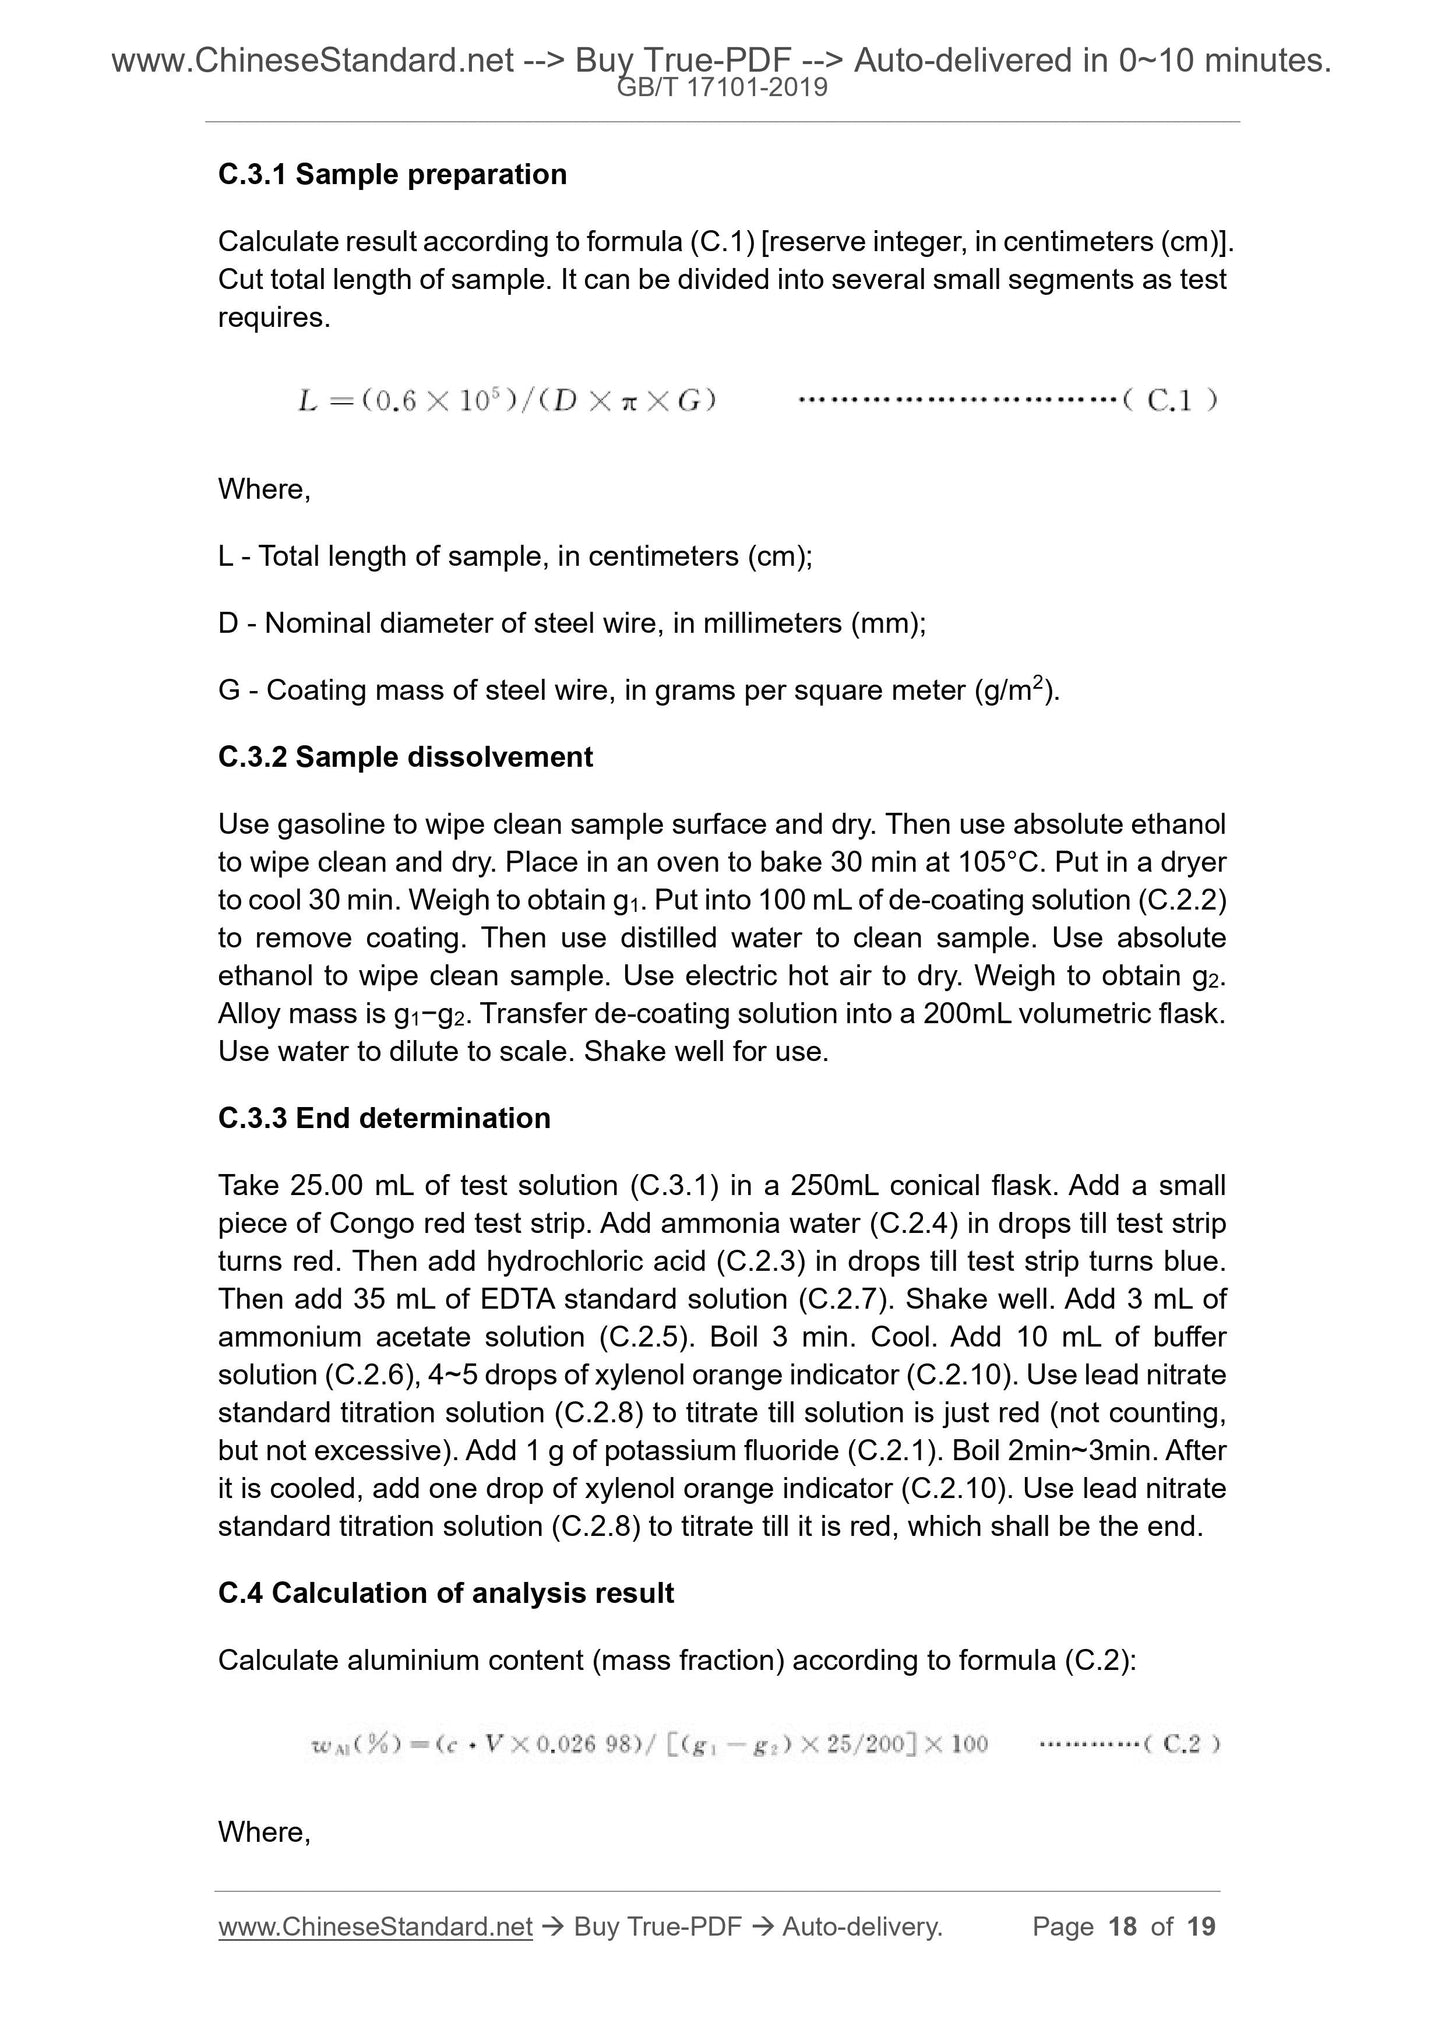 GB/T 17101-2019 Page 8